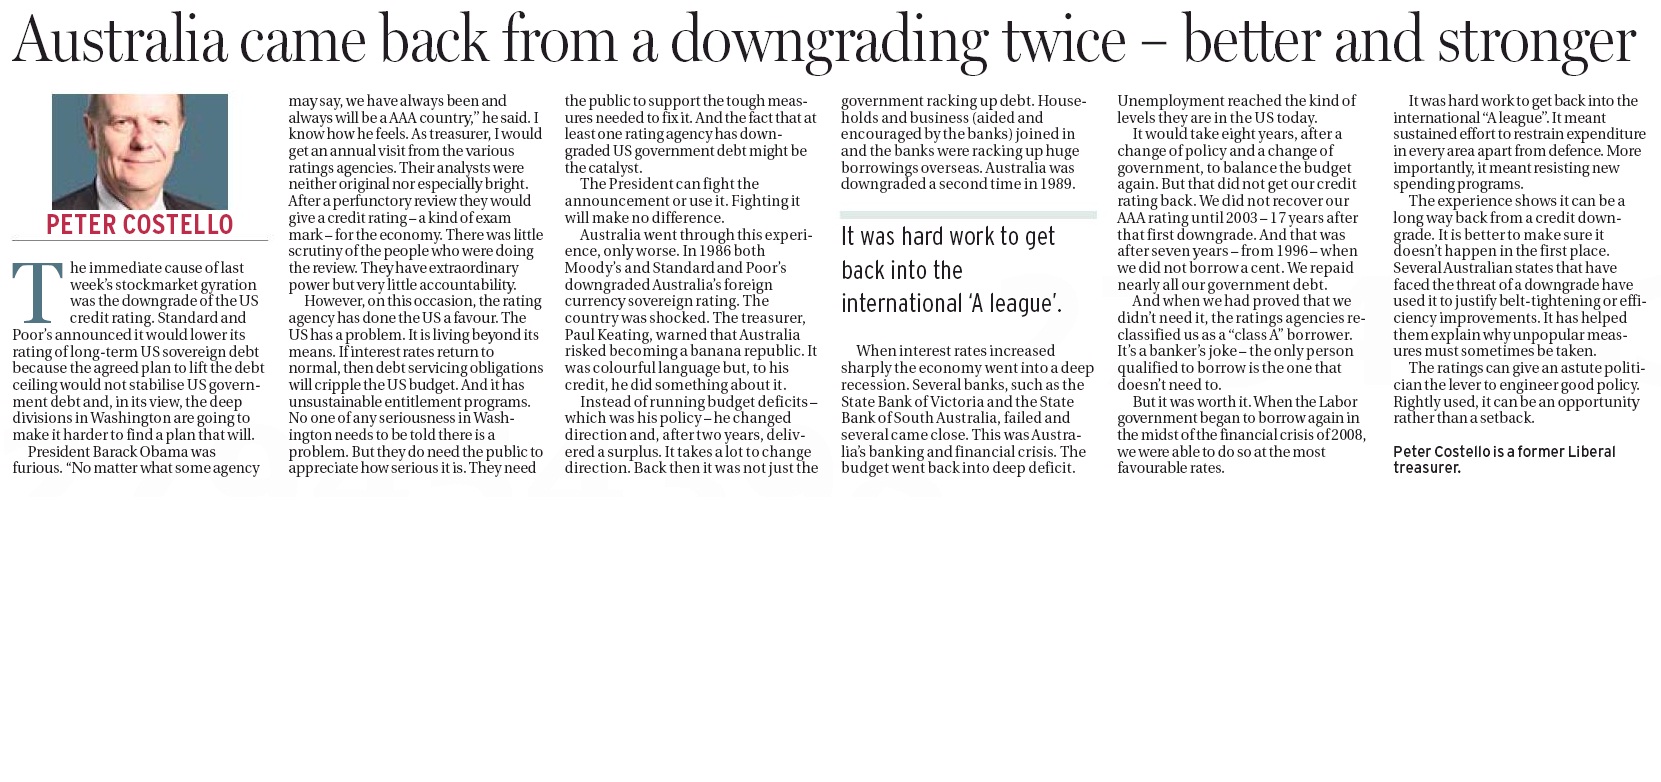 smh_-_australia_came_back_from_a_downgrading_twice_-_better_and_stronger_-_17_august_2011jpg